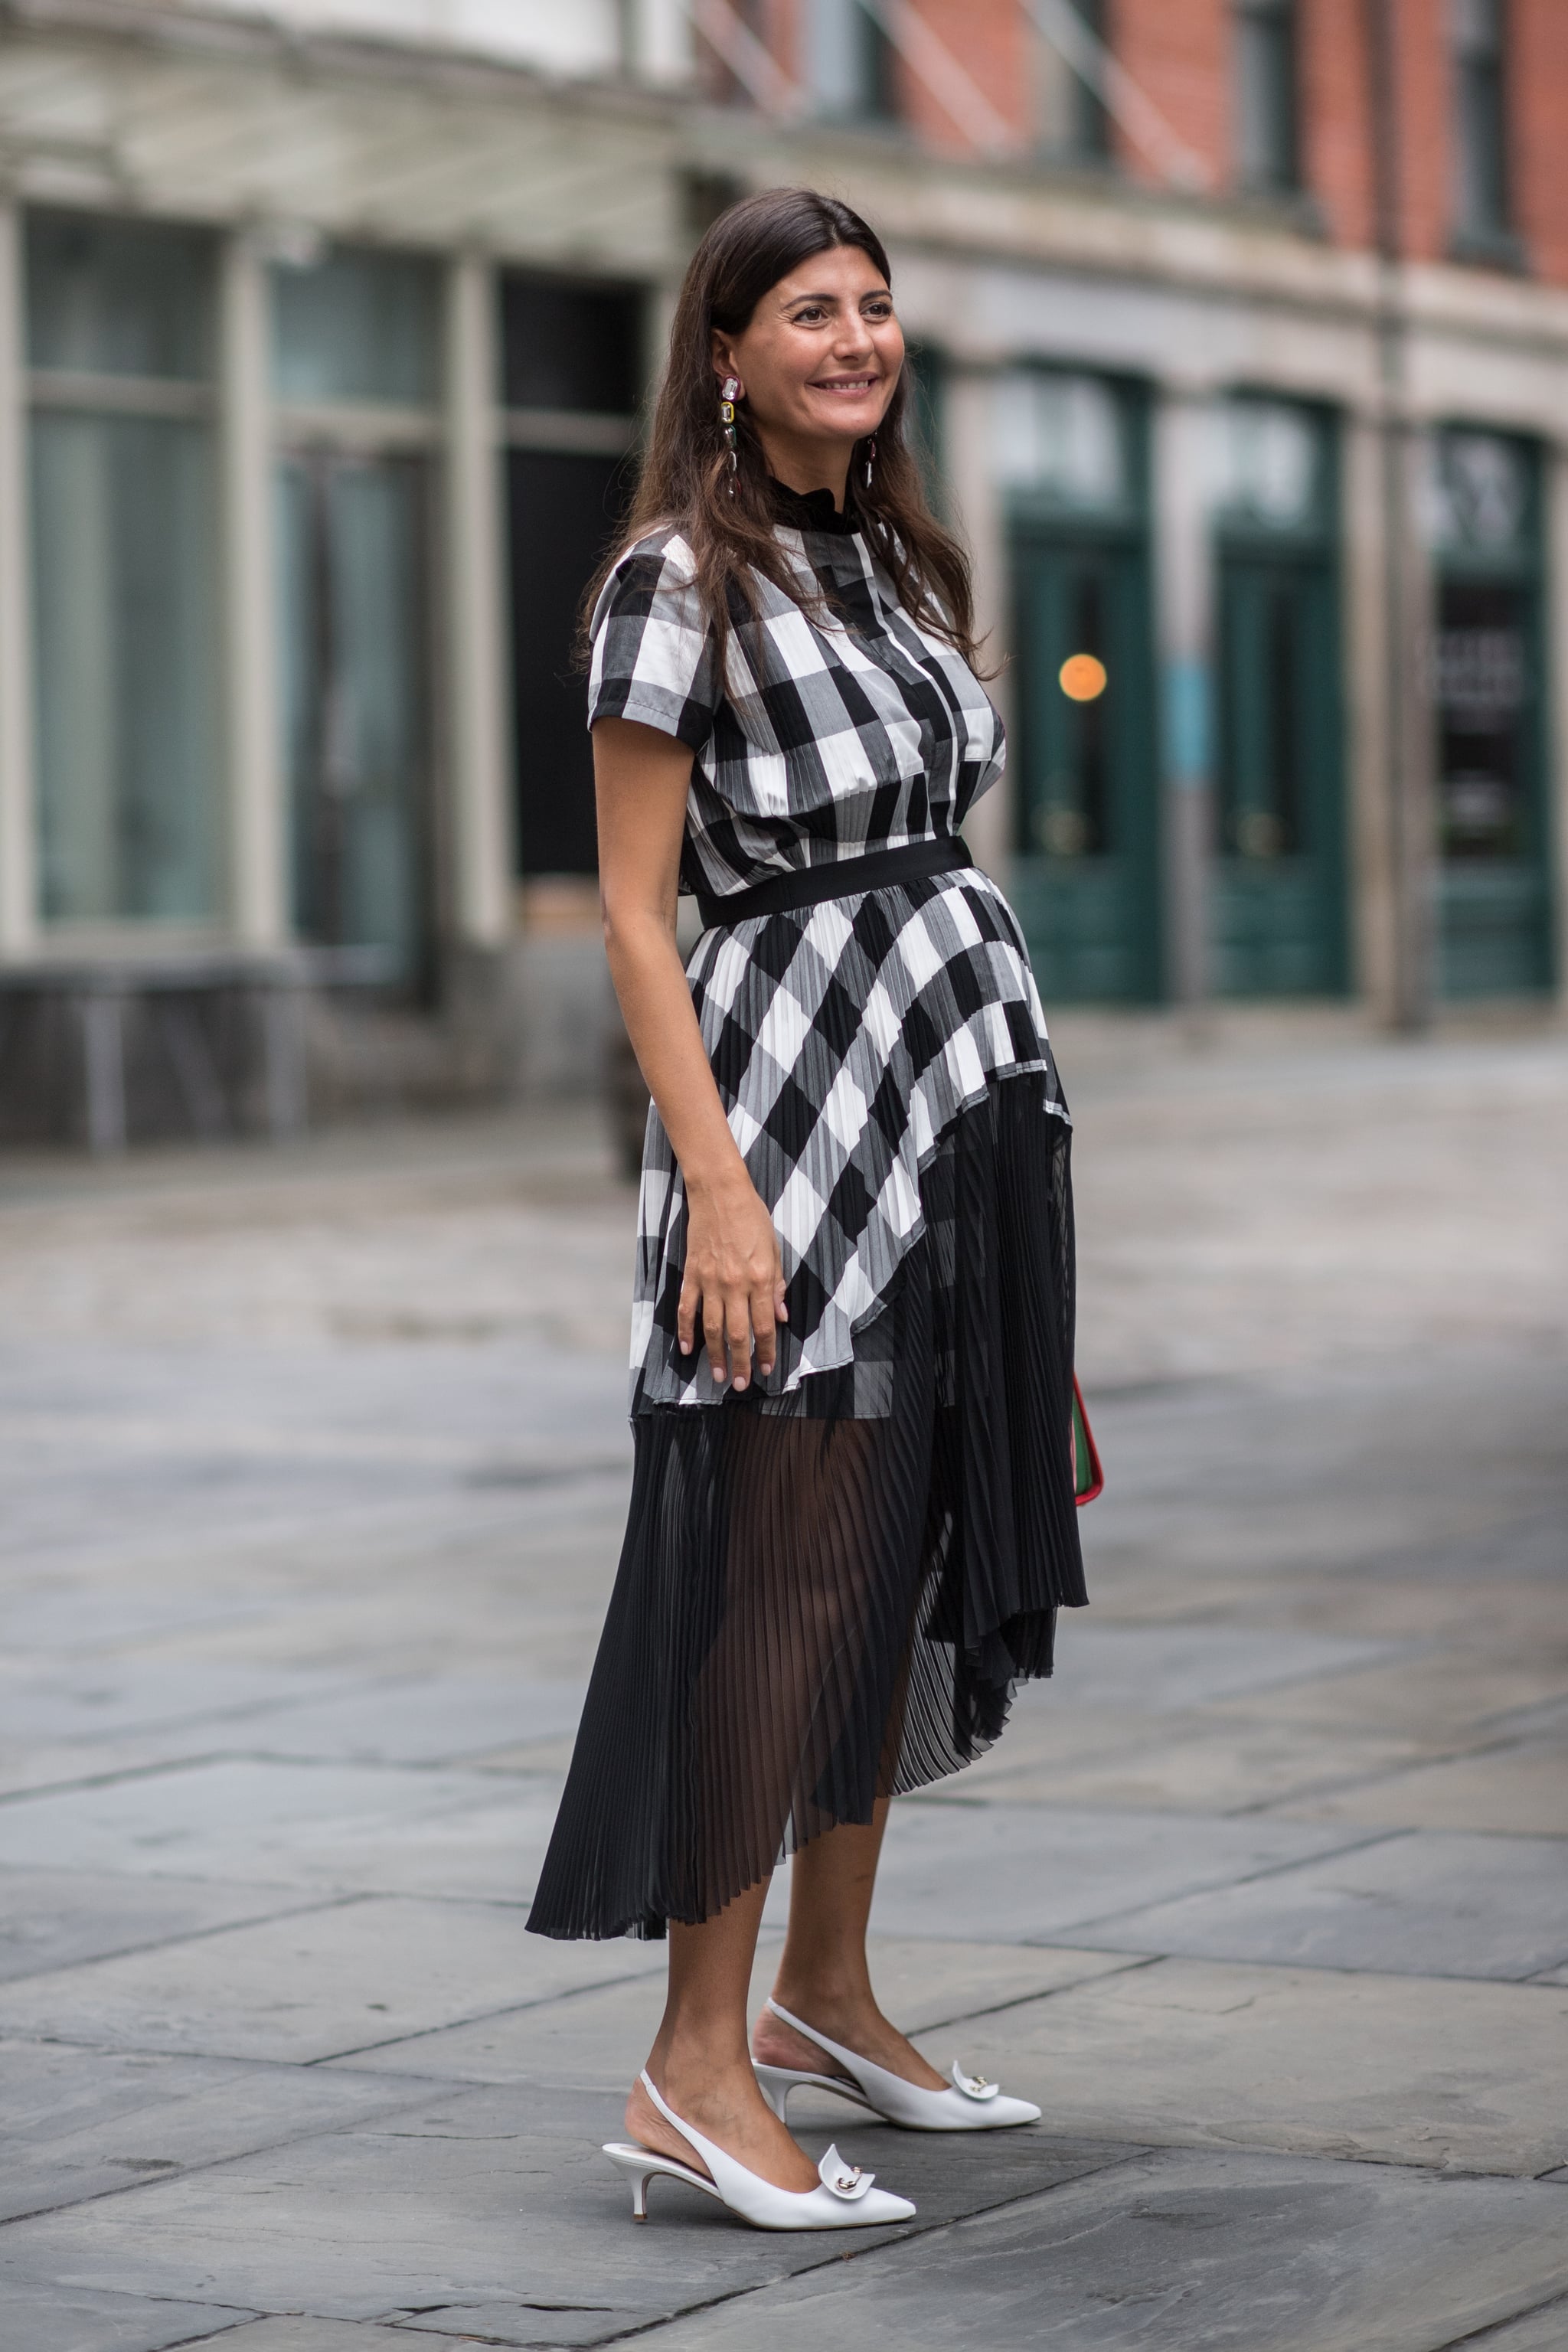 WORK OUTFITS: PLAY WITH THE PLAIDS